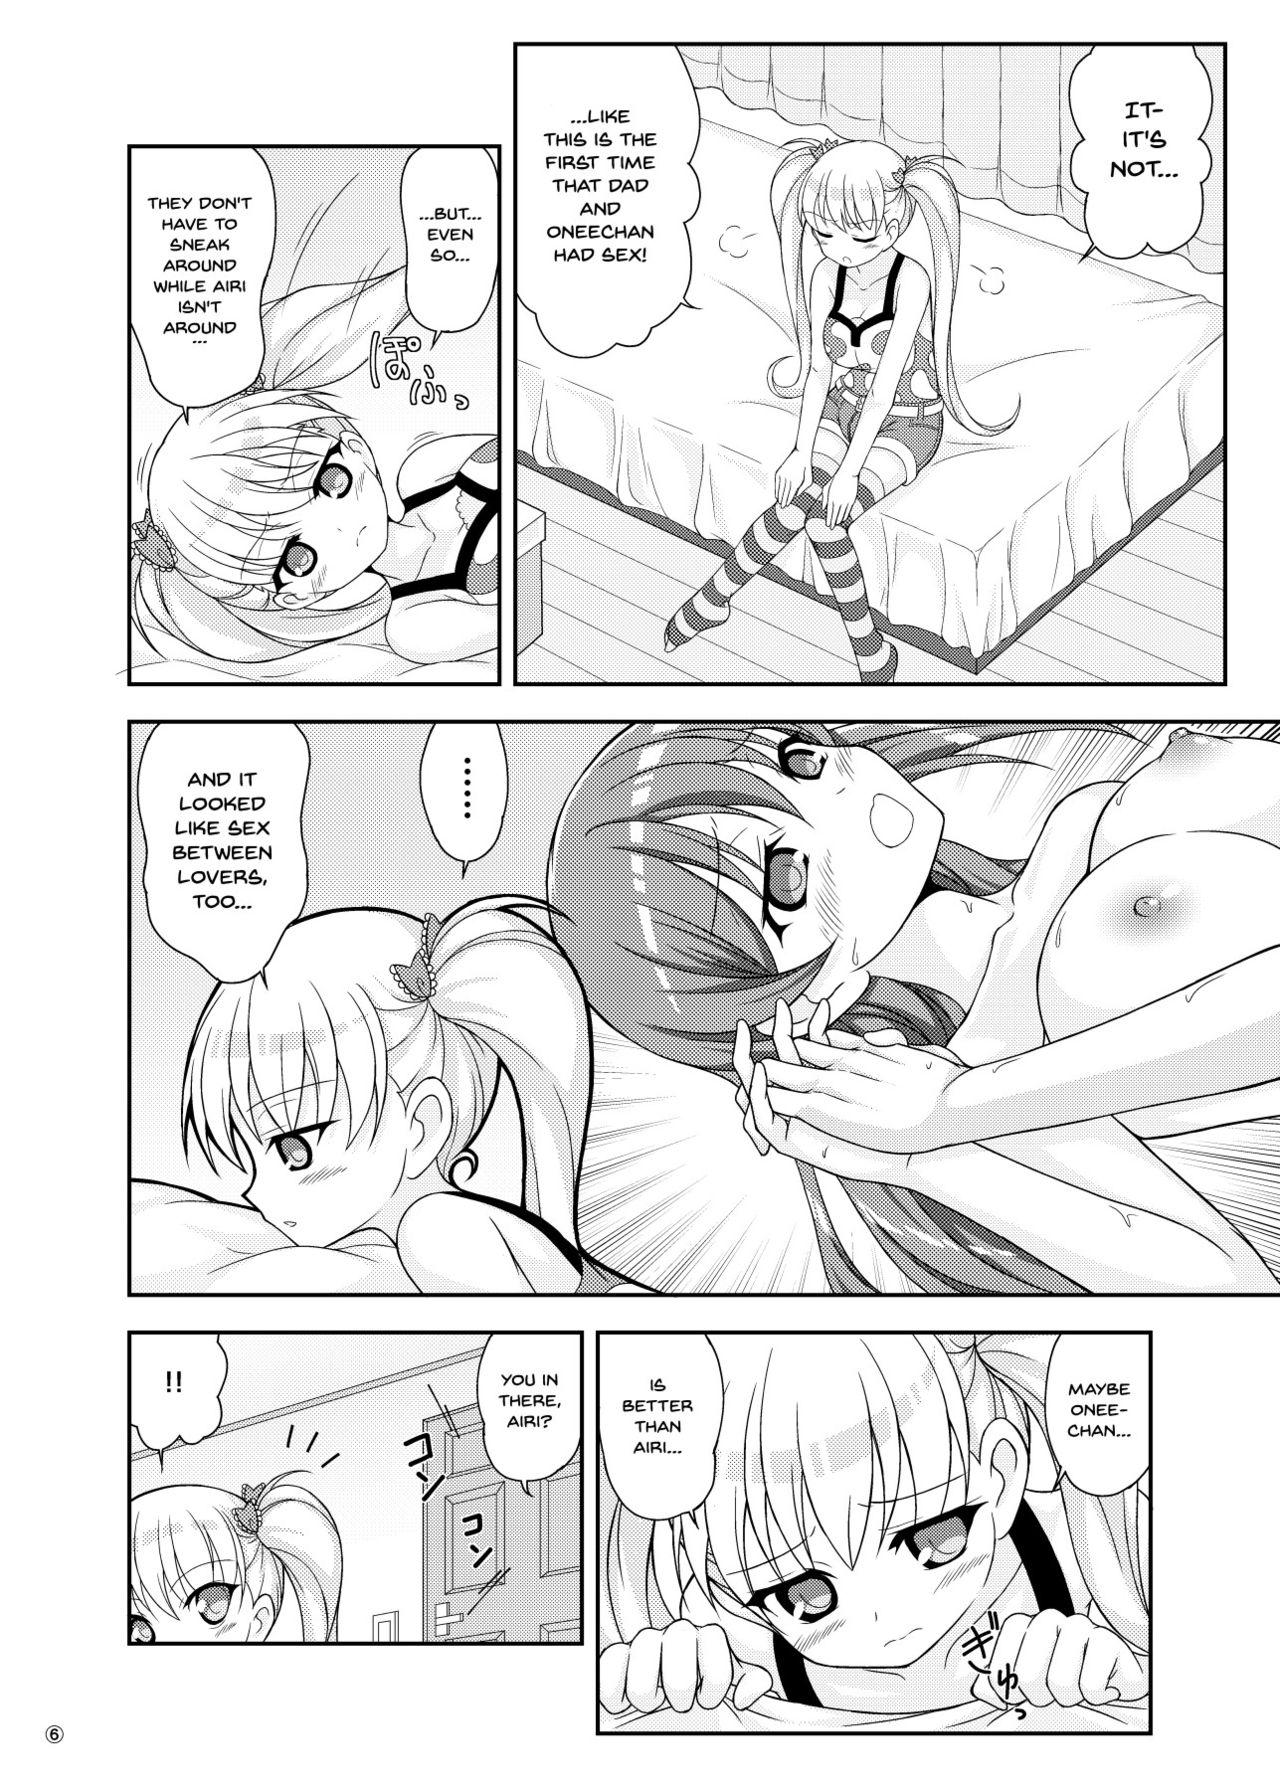 Sem Camisinha Oni Chichi Hon Datte no! | It's An Oni Chichi Book! - Oni chichi Tight Pussy - Page 5